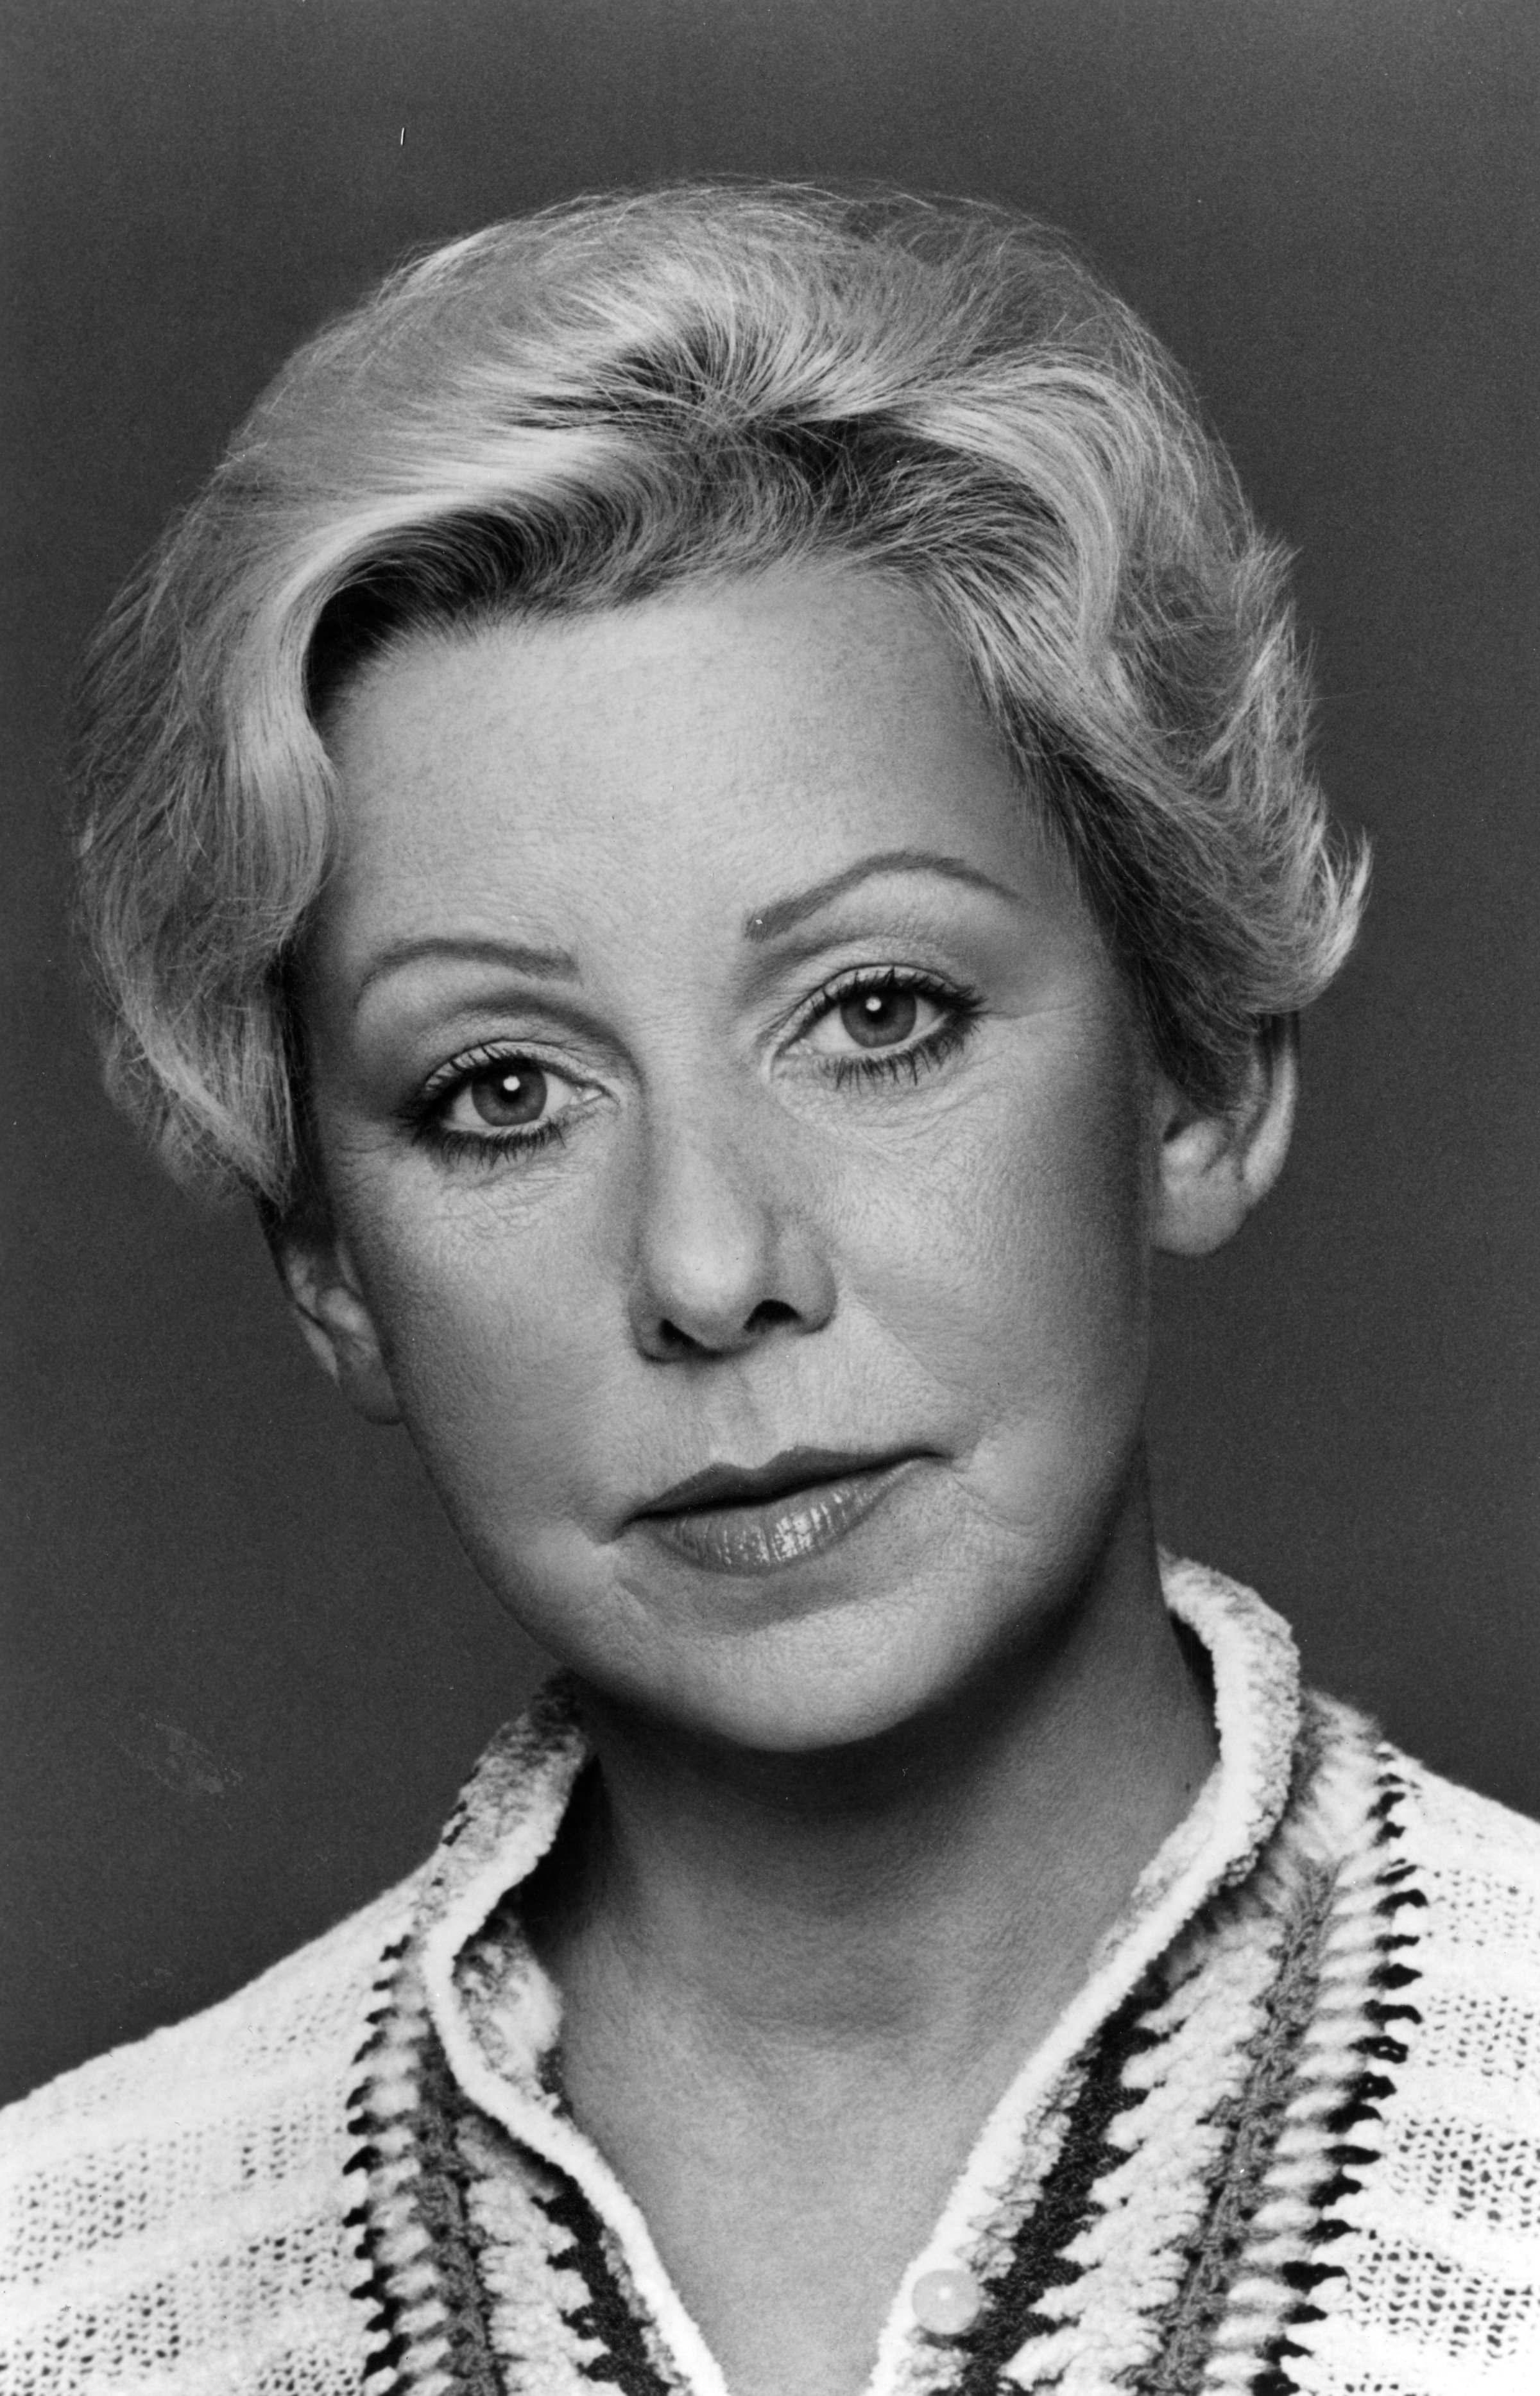 Portrait of American politician and mayor of Chicago Jane Byrne, early to mid 1980s.